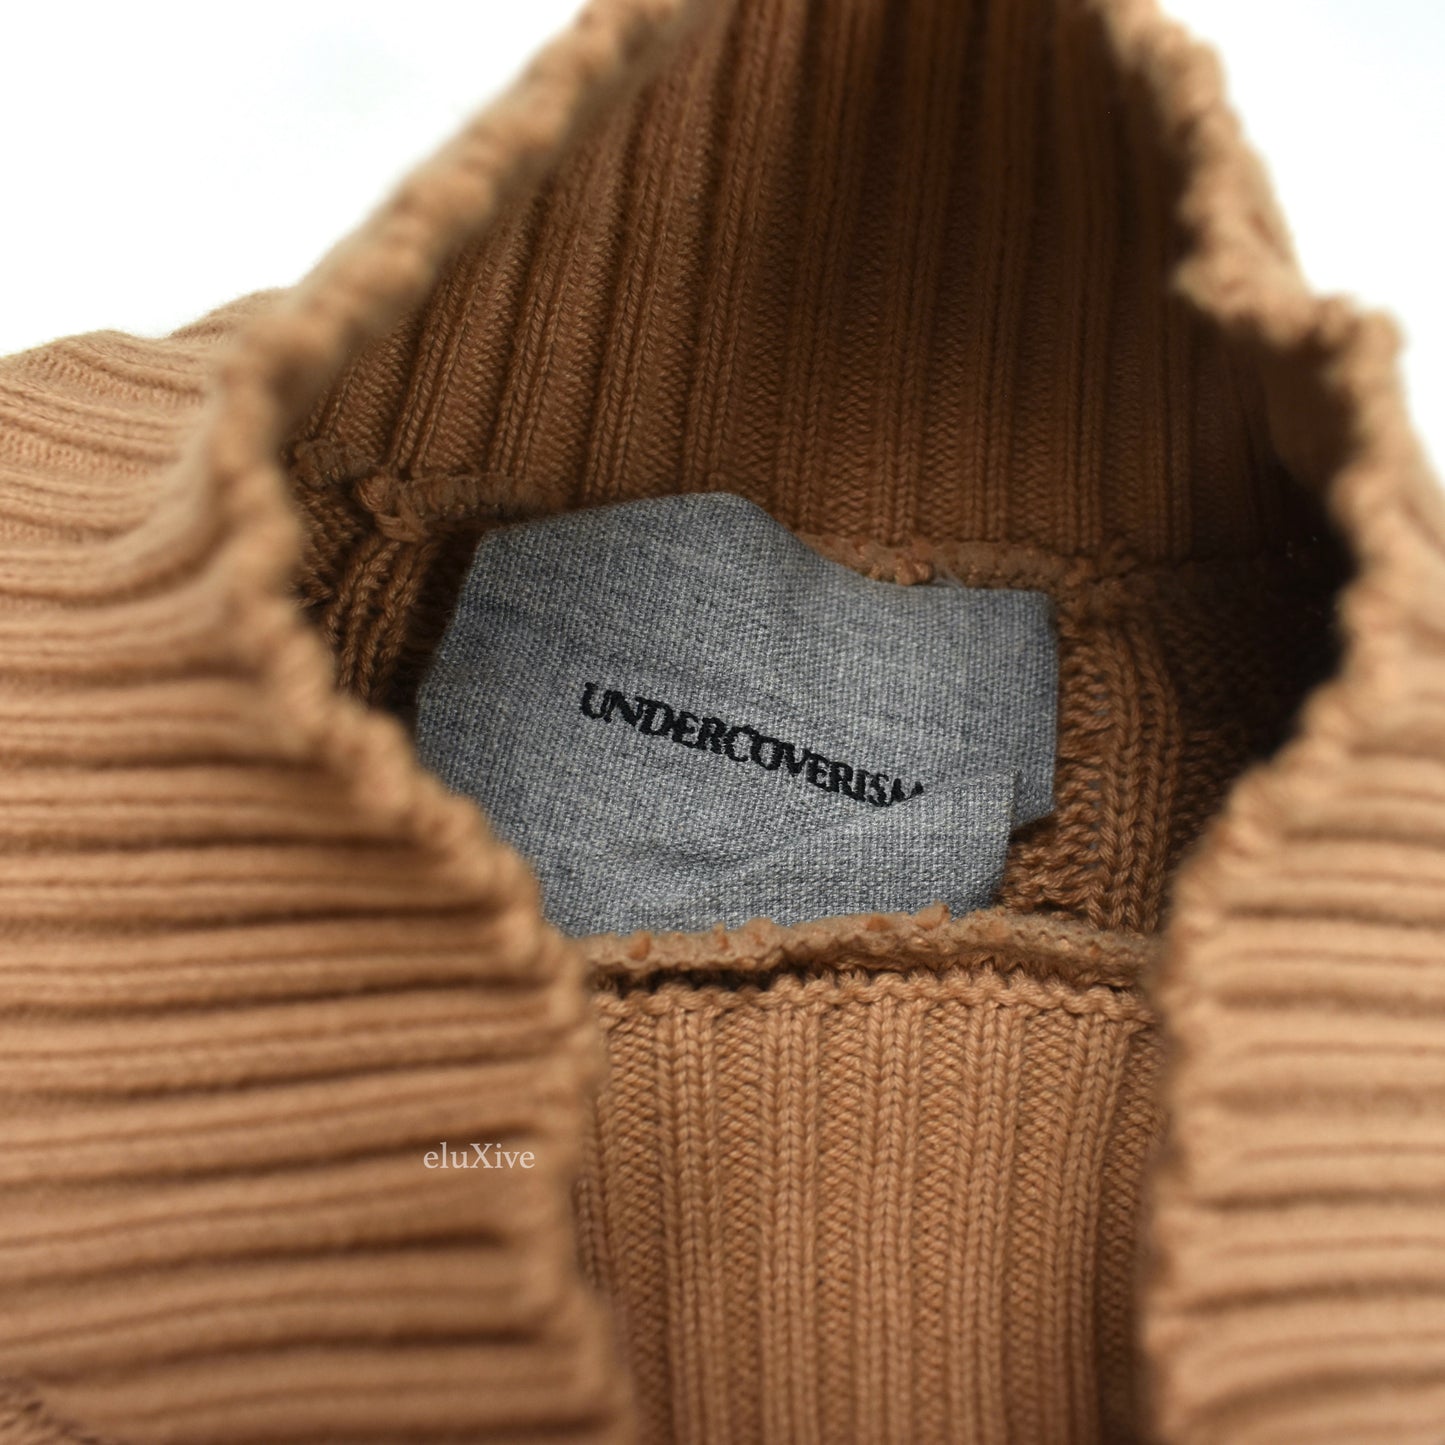 Undercover - AW12 'Psycho Color' Tan Cable Knit Mock Neck Sweater